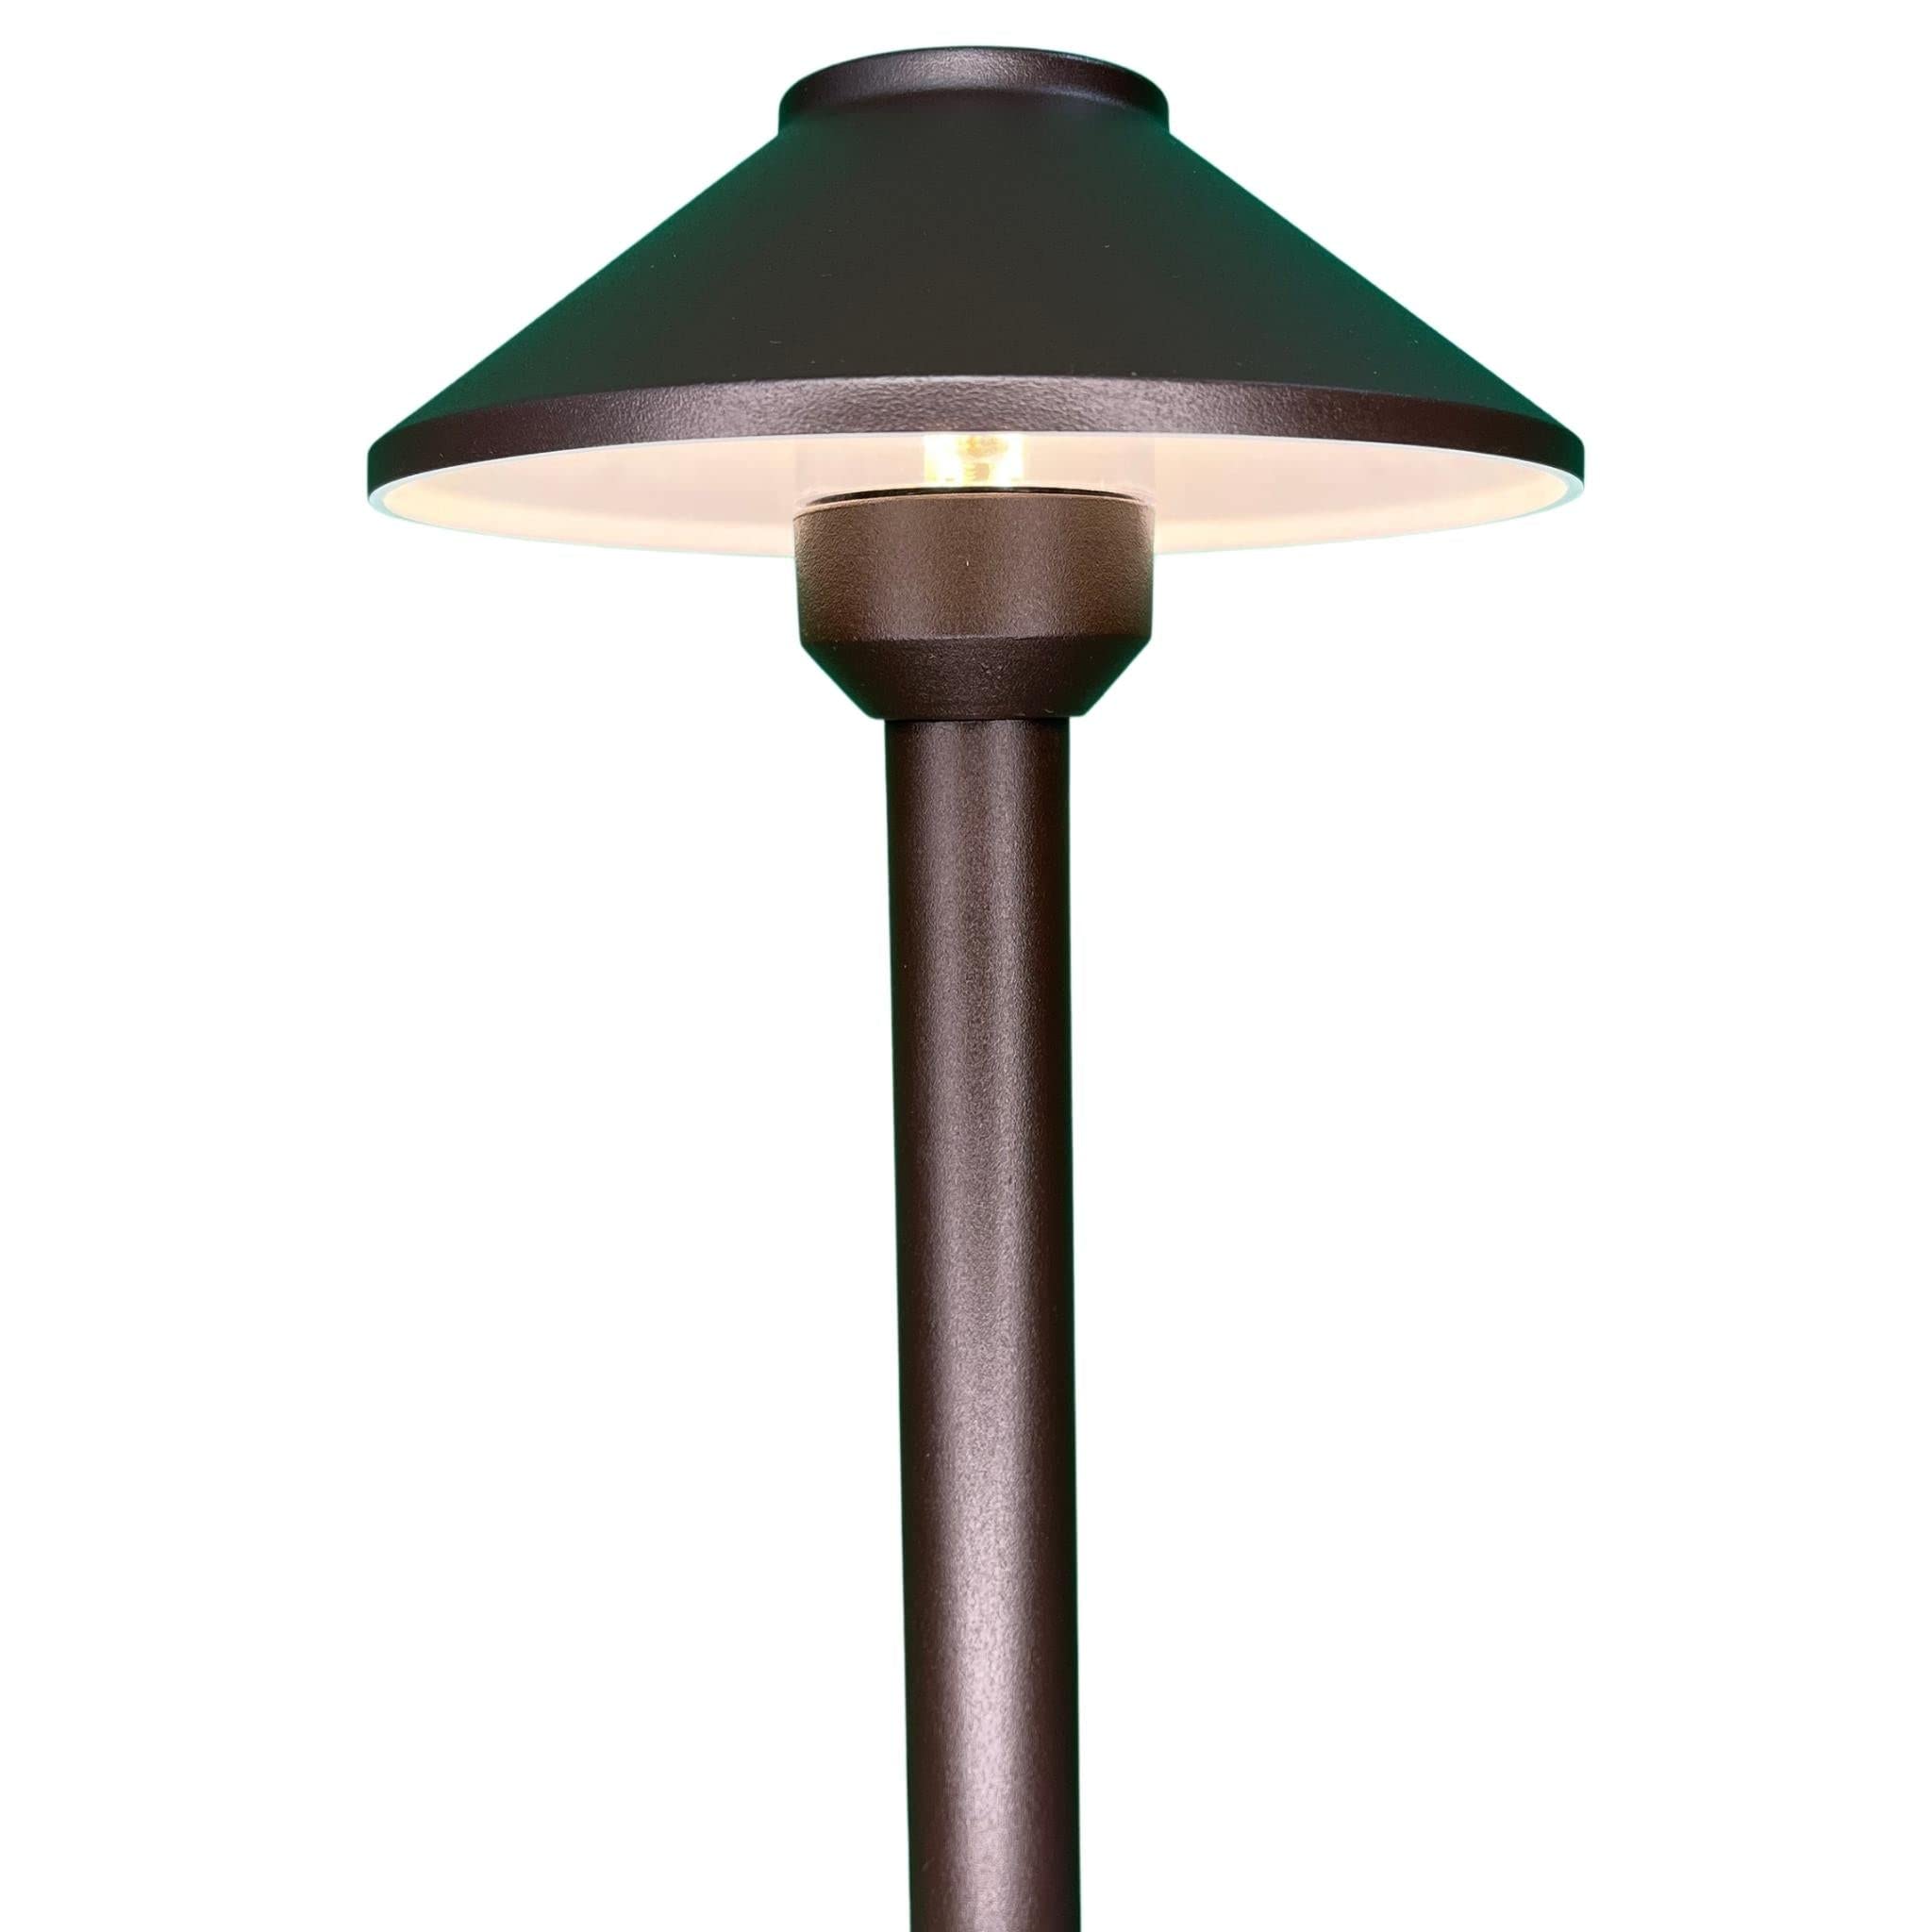 PRO-Trade Outdoor Pathway Lights - Premium Outdoor Landscaping Lighting for Paths, Driveways, Grounds, and Landscapes - Waterproof, Weatherproof, Wired Cast Aluminum Metal LED Area Lights (Bronze)